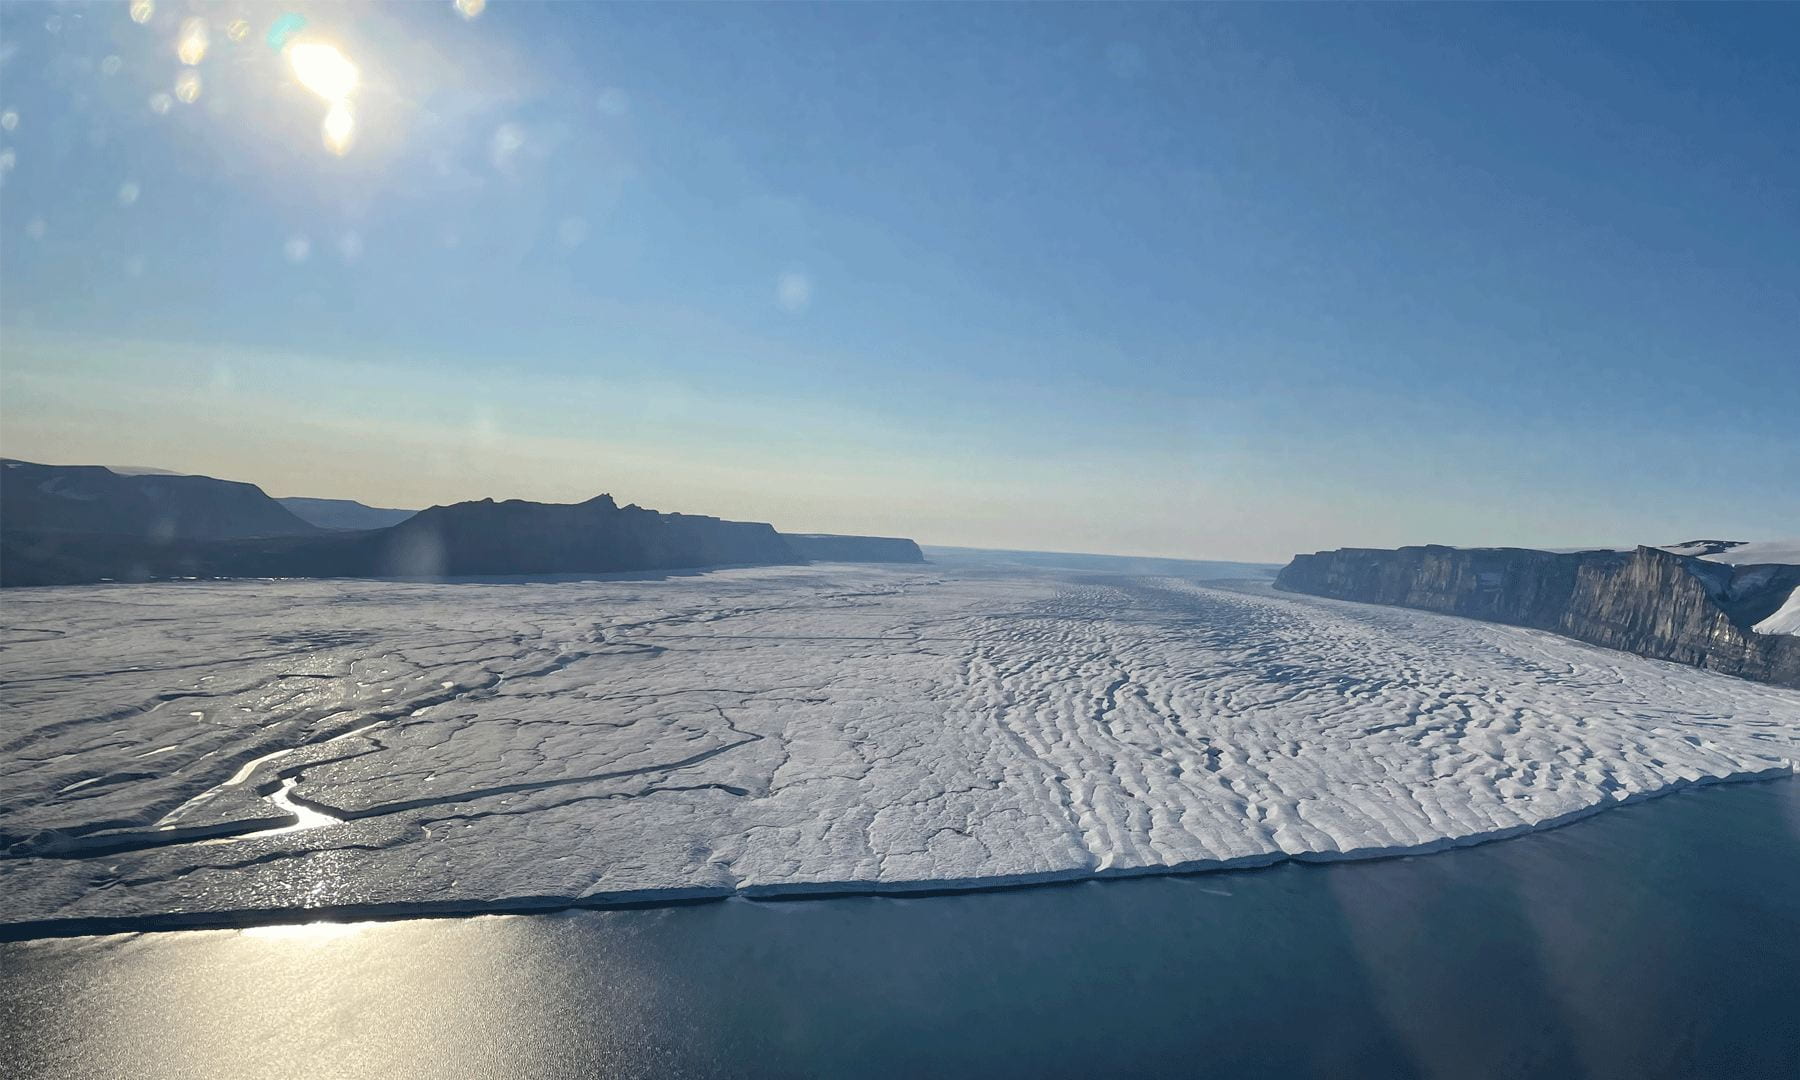 The Ryder ice shelf in Greenland. Photo by Mike Wood.